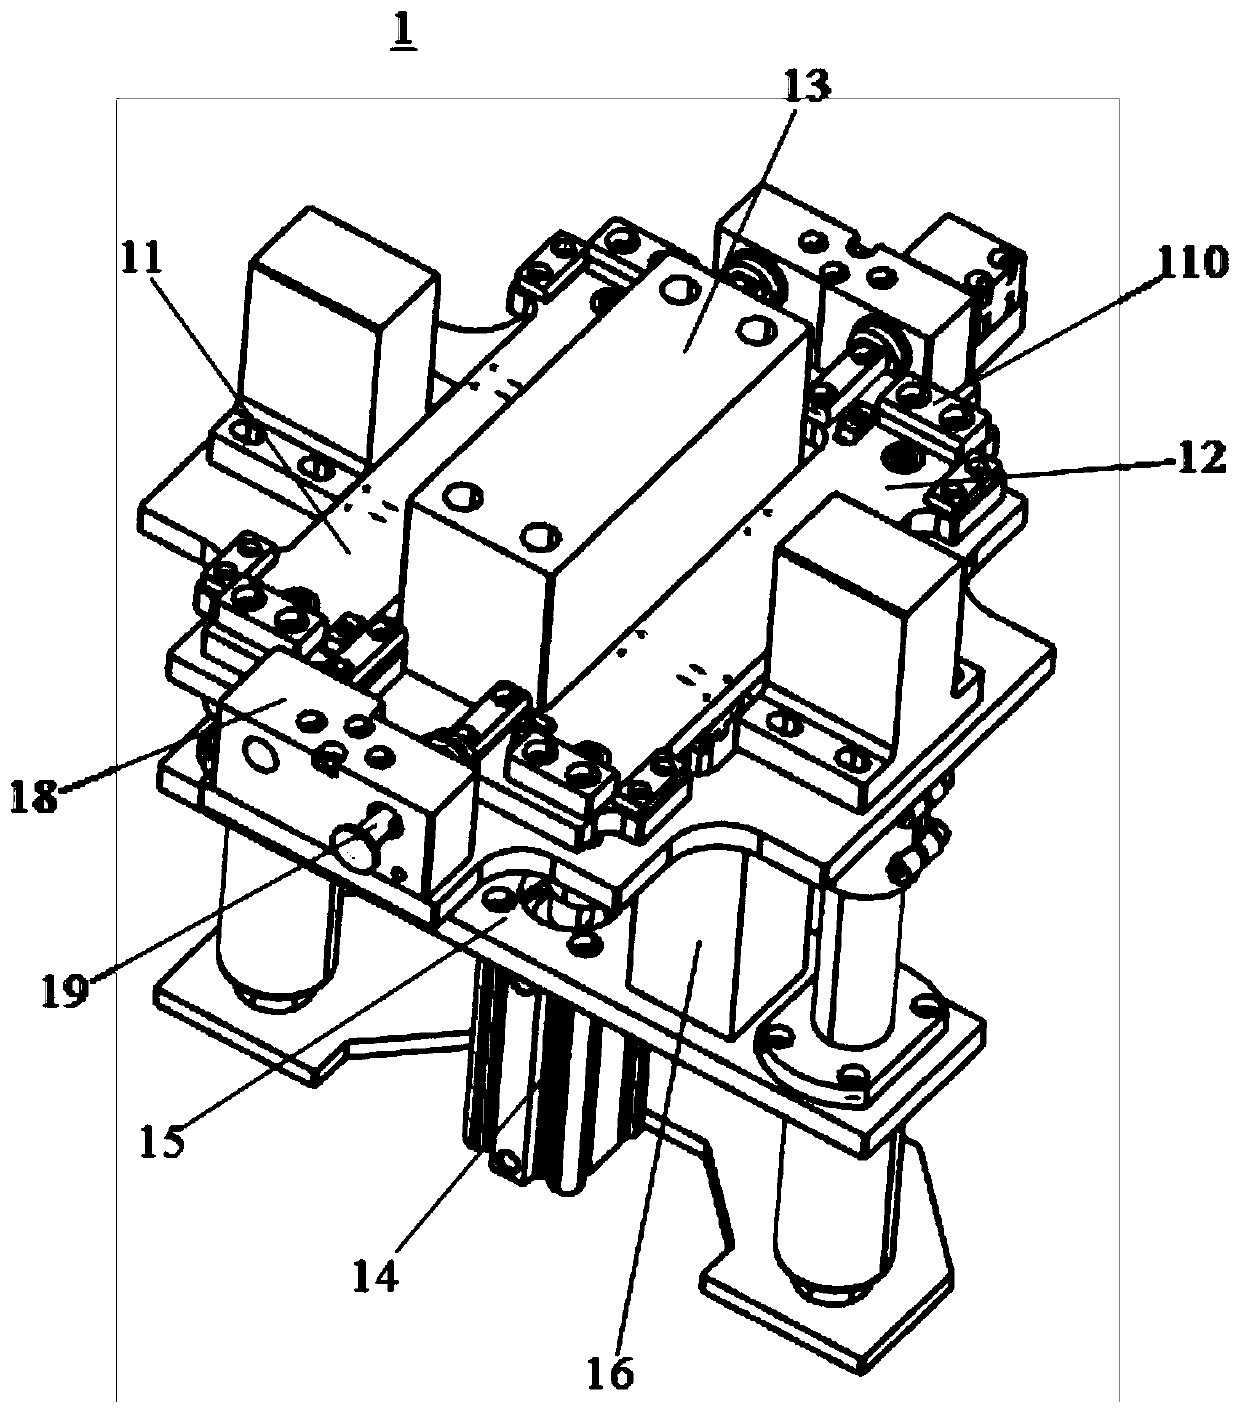 Shell product full-automatic pressing connecting and assembling mechanism